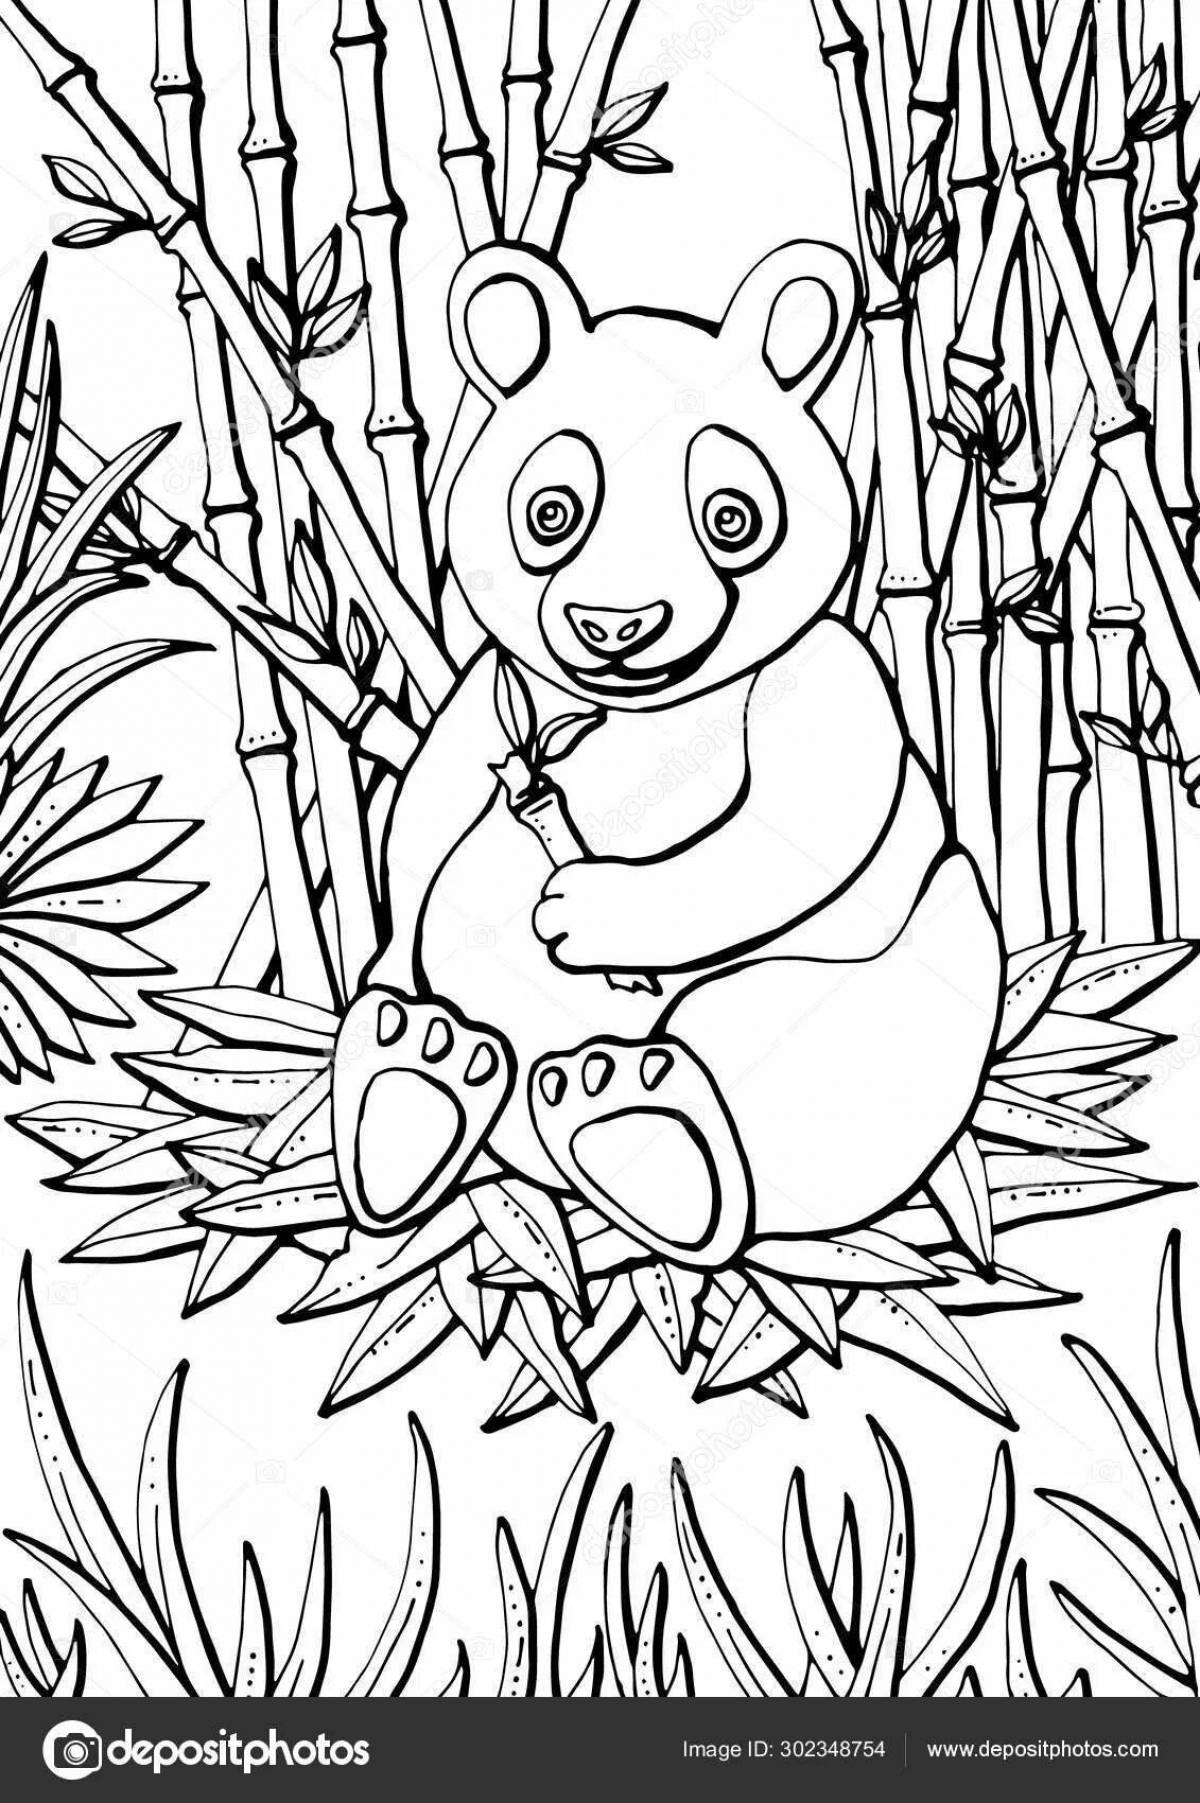 Funny panda coloring book with bamboo